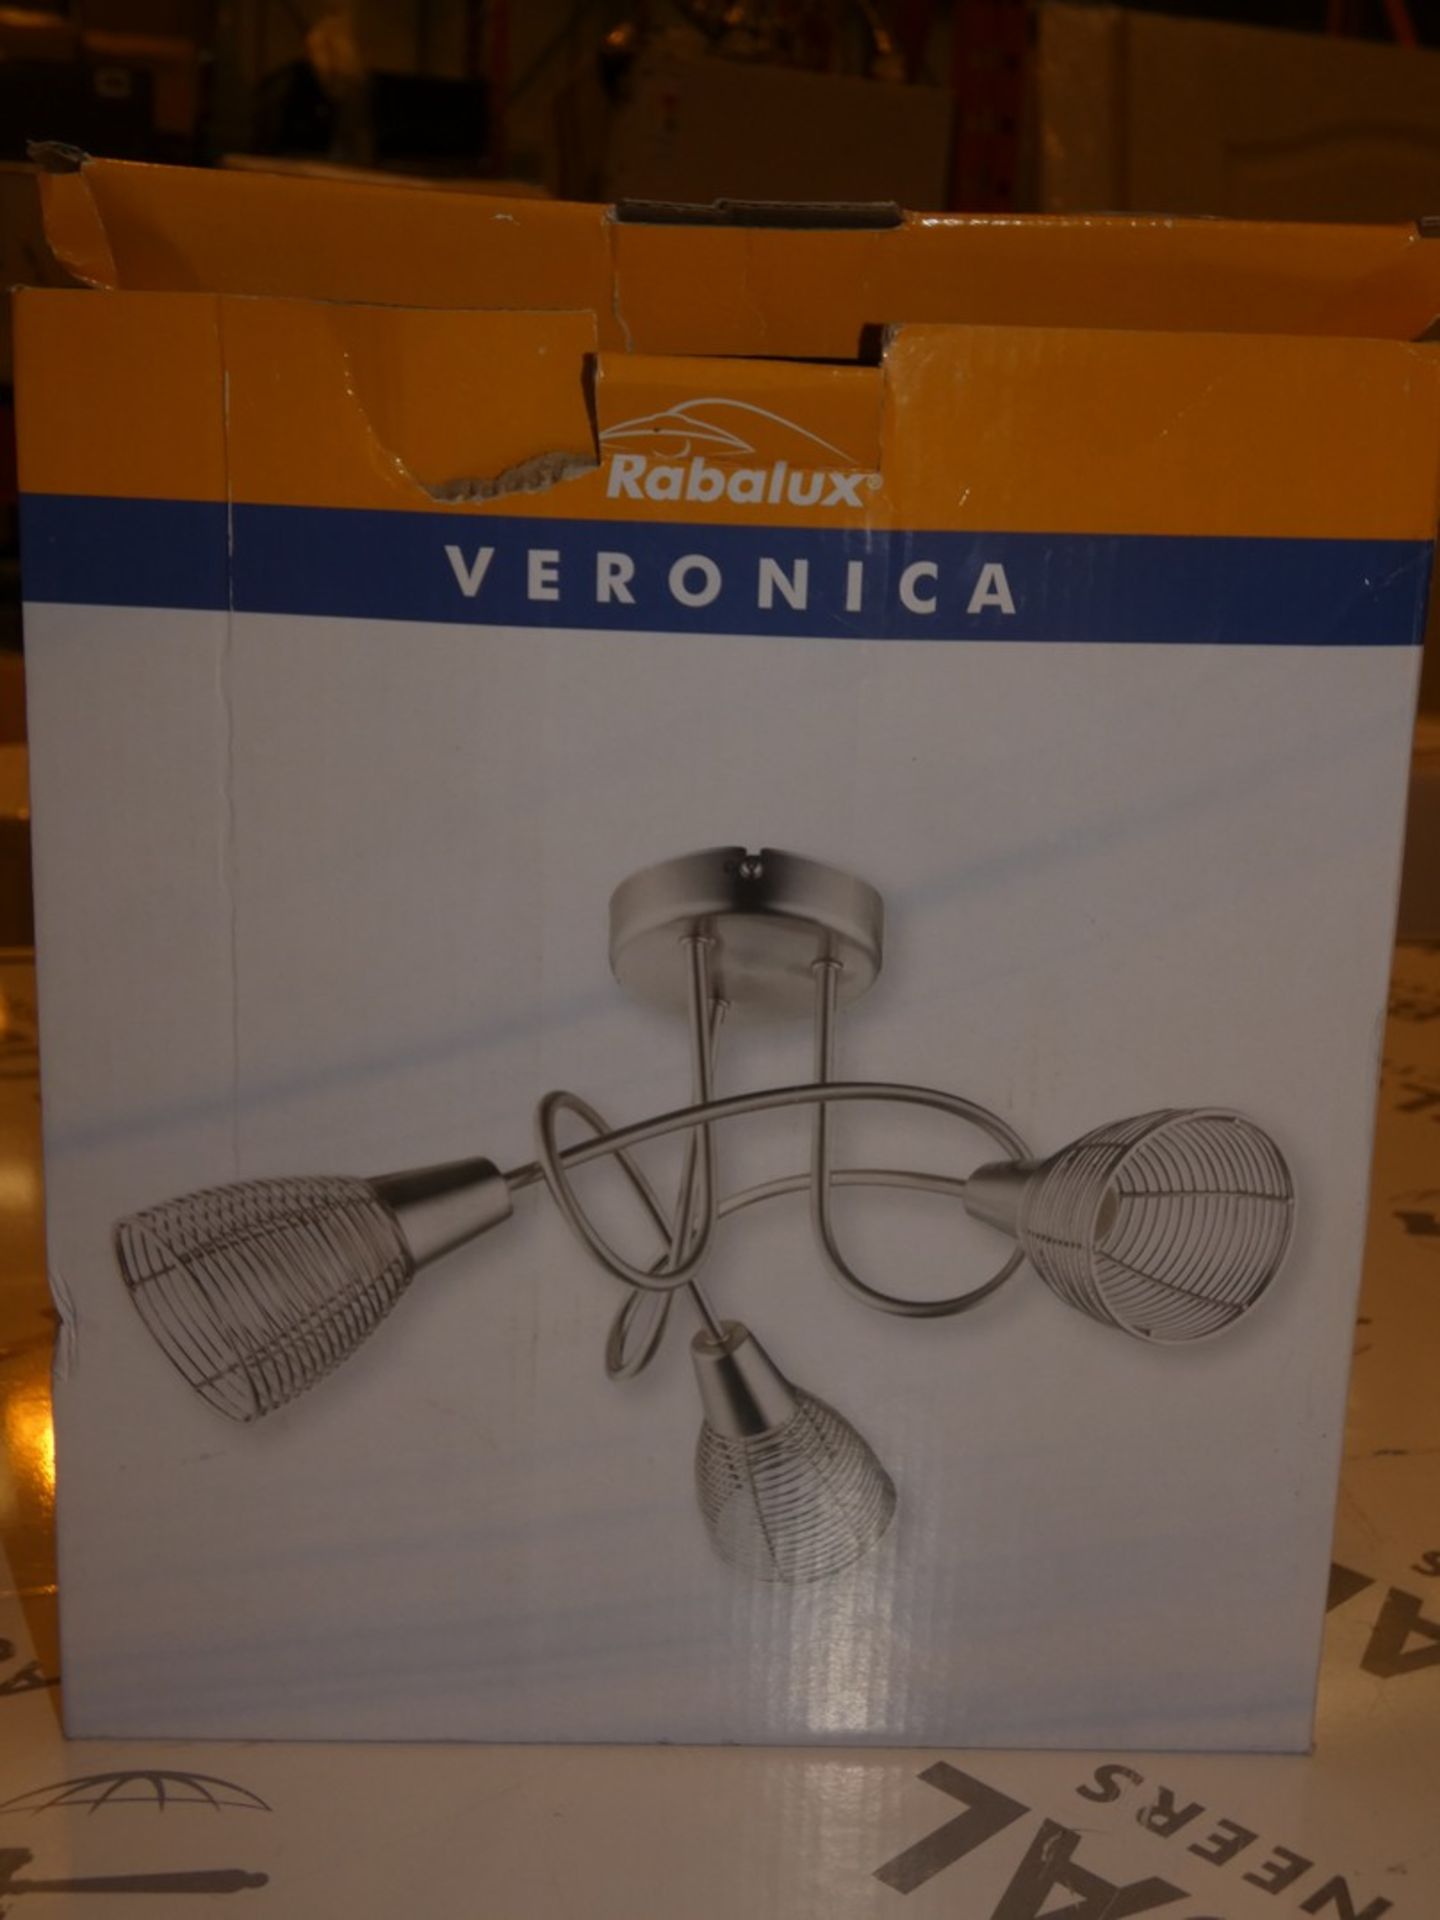 Boxed Rabalux Veronica Ceiling Light RRP £75 (14568) (Public Viewing and Appraisals Available)